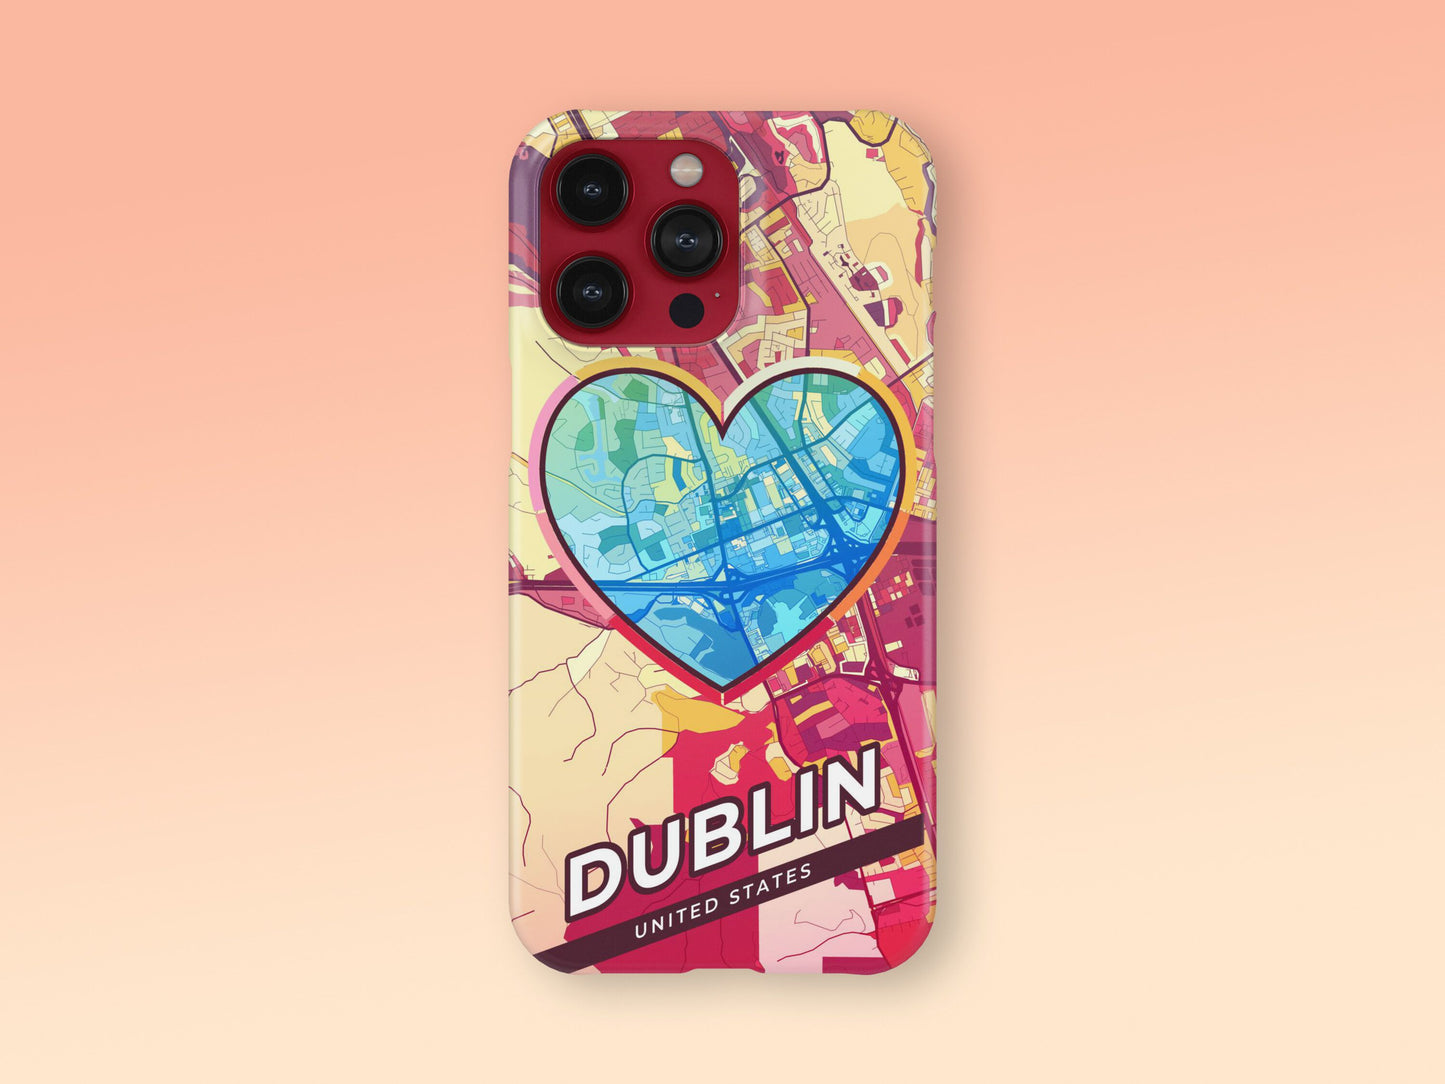 Dublin California slim phone case with colorful icon. Birthday, wedding or housewarming gift. Couple match cases. 2